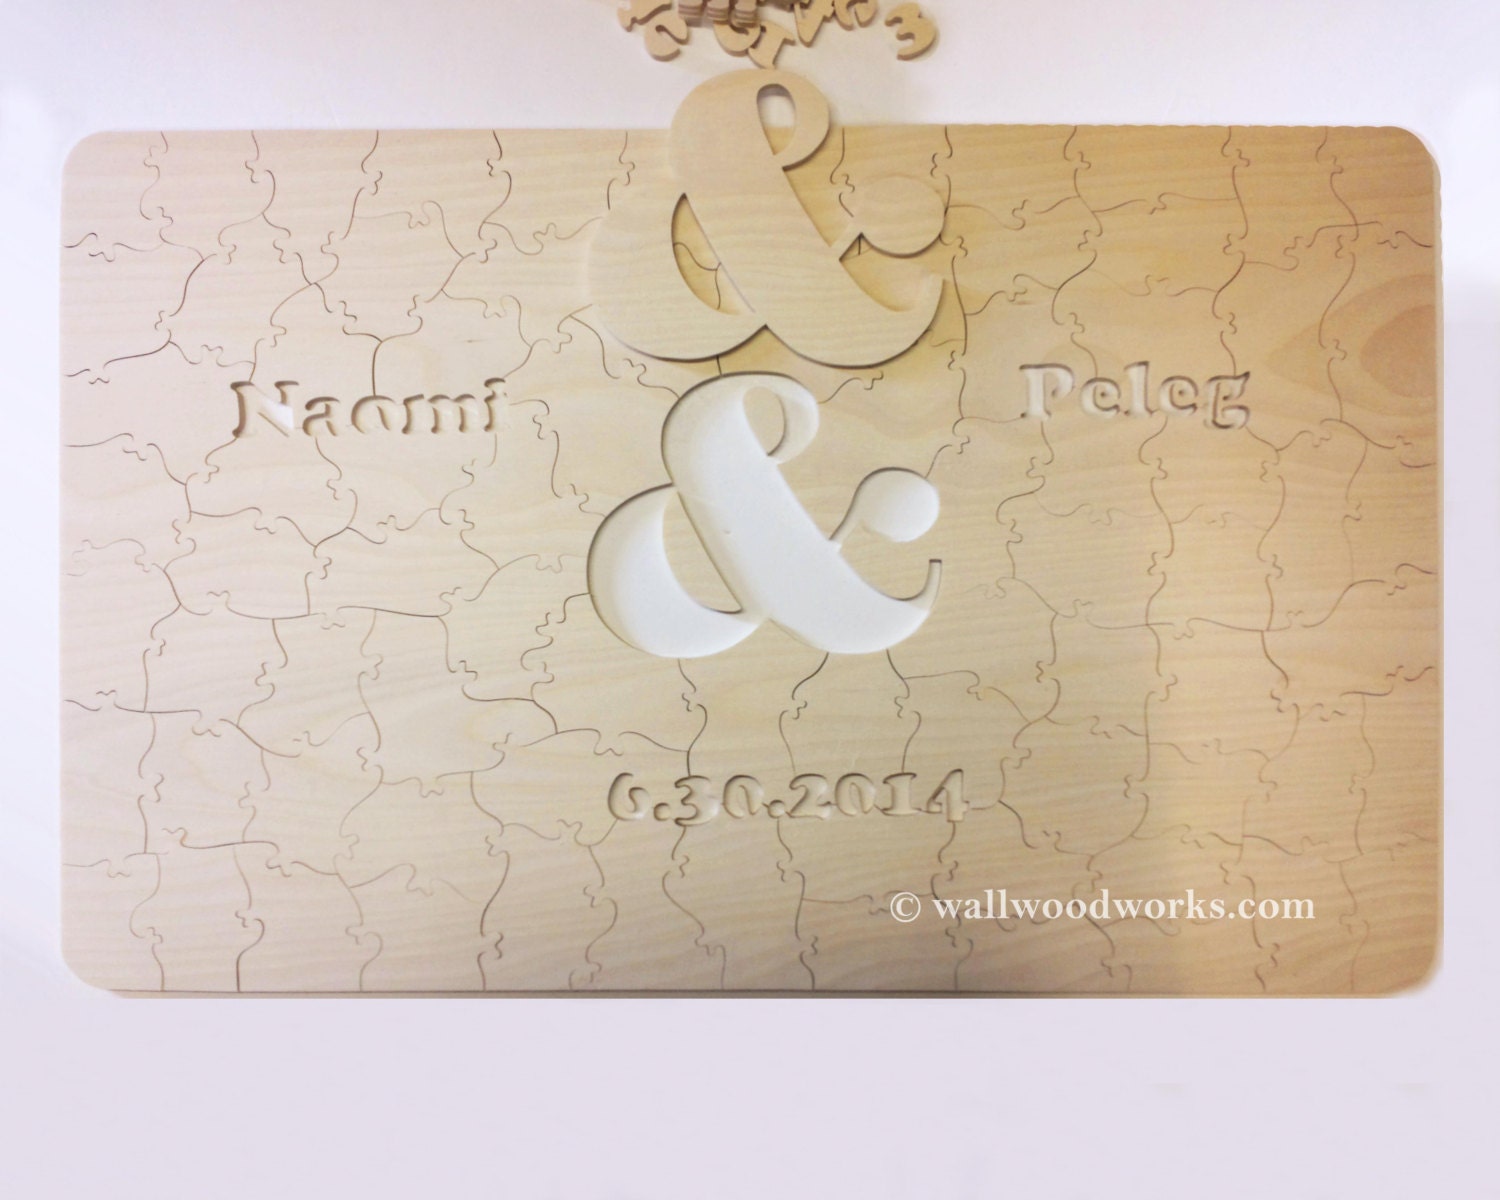 Wedding Puzzle Guest Book Natural Wood & Ampersand Cutout 10-50 Pieces (Size - Medium) Guest Book for Rustic or Alternative Wedding Decor